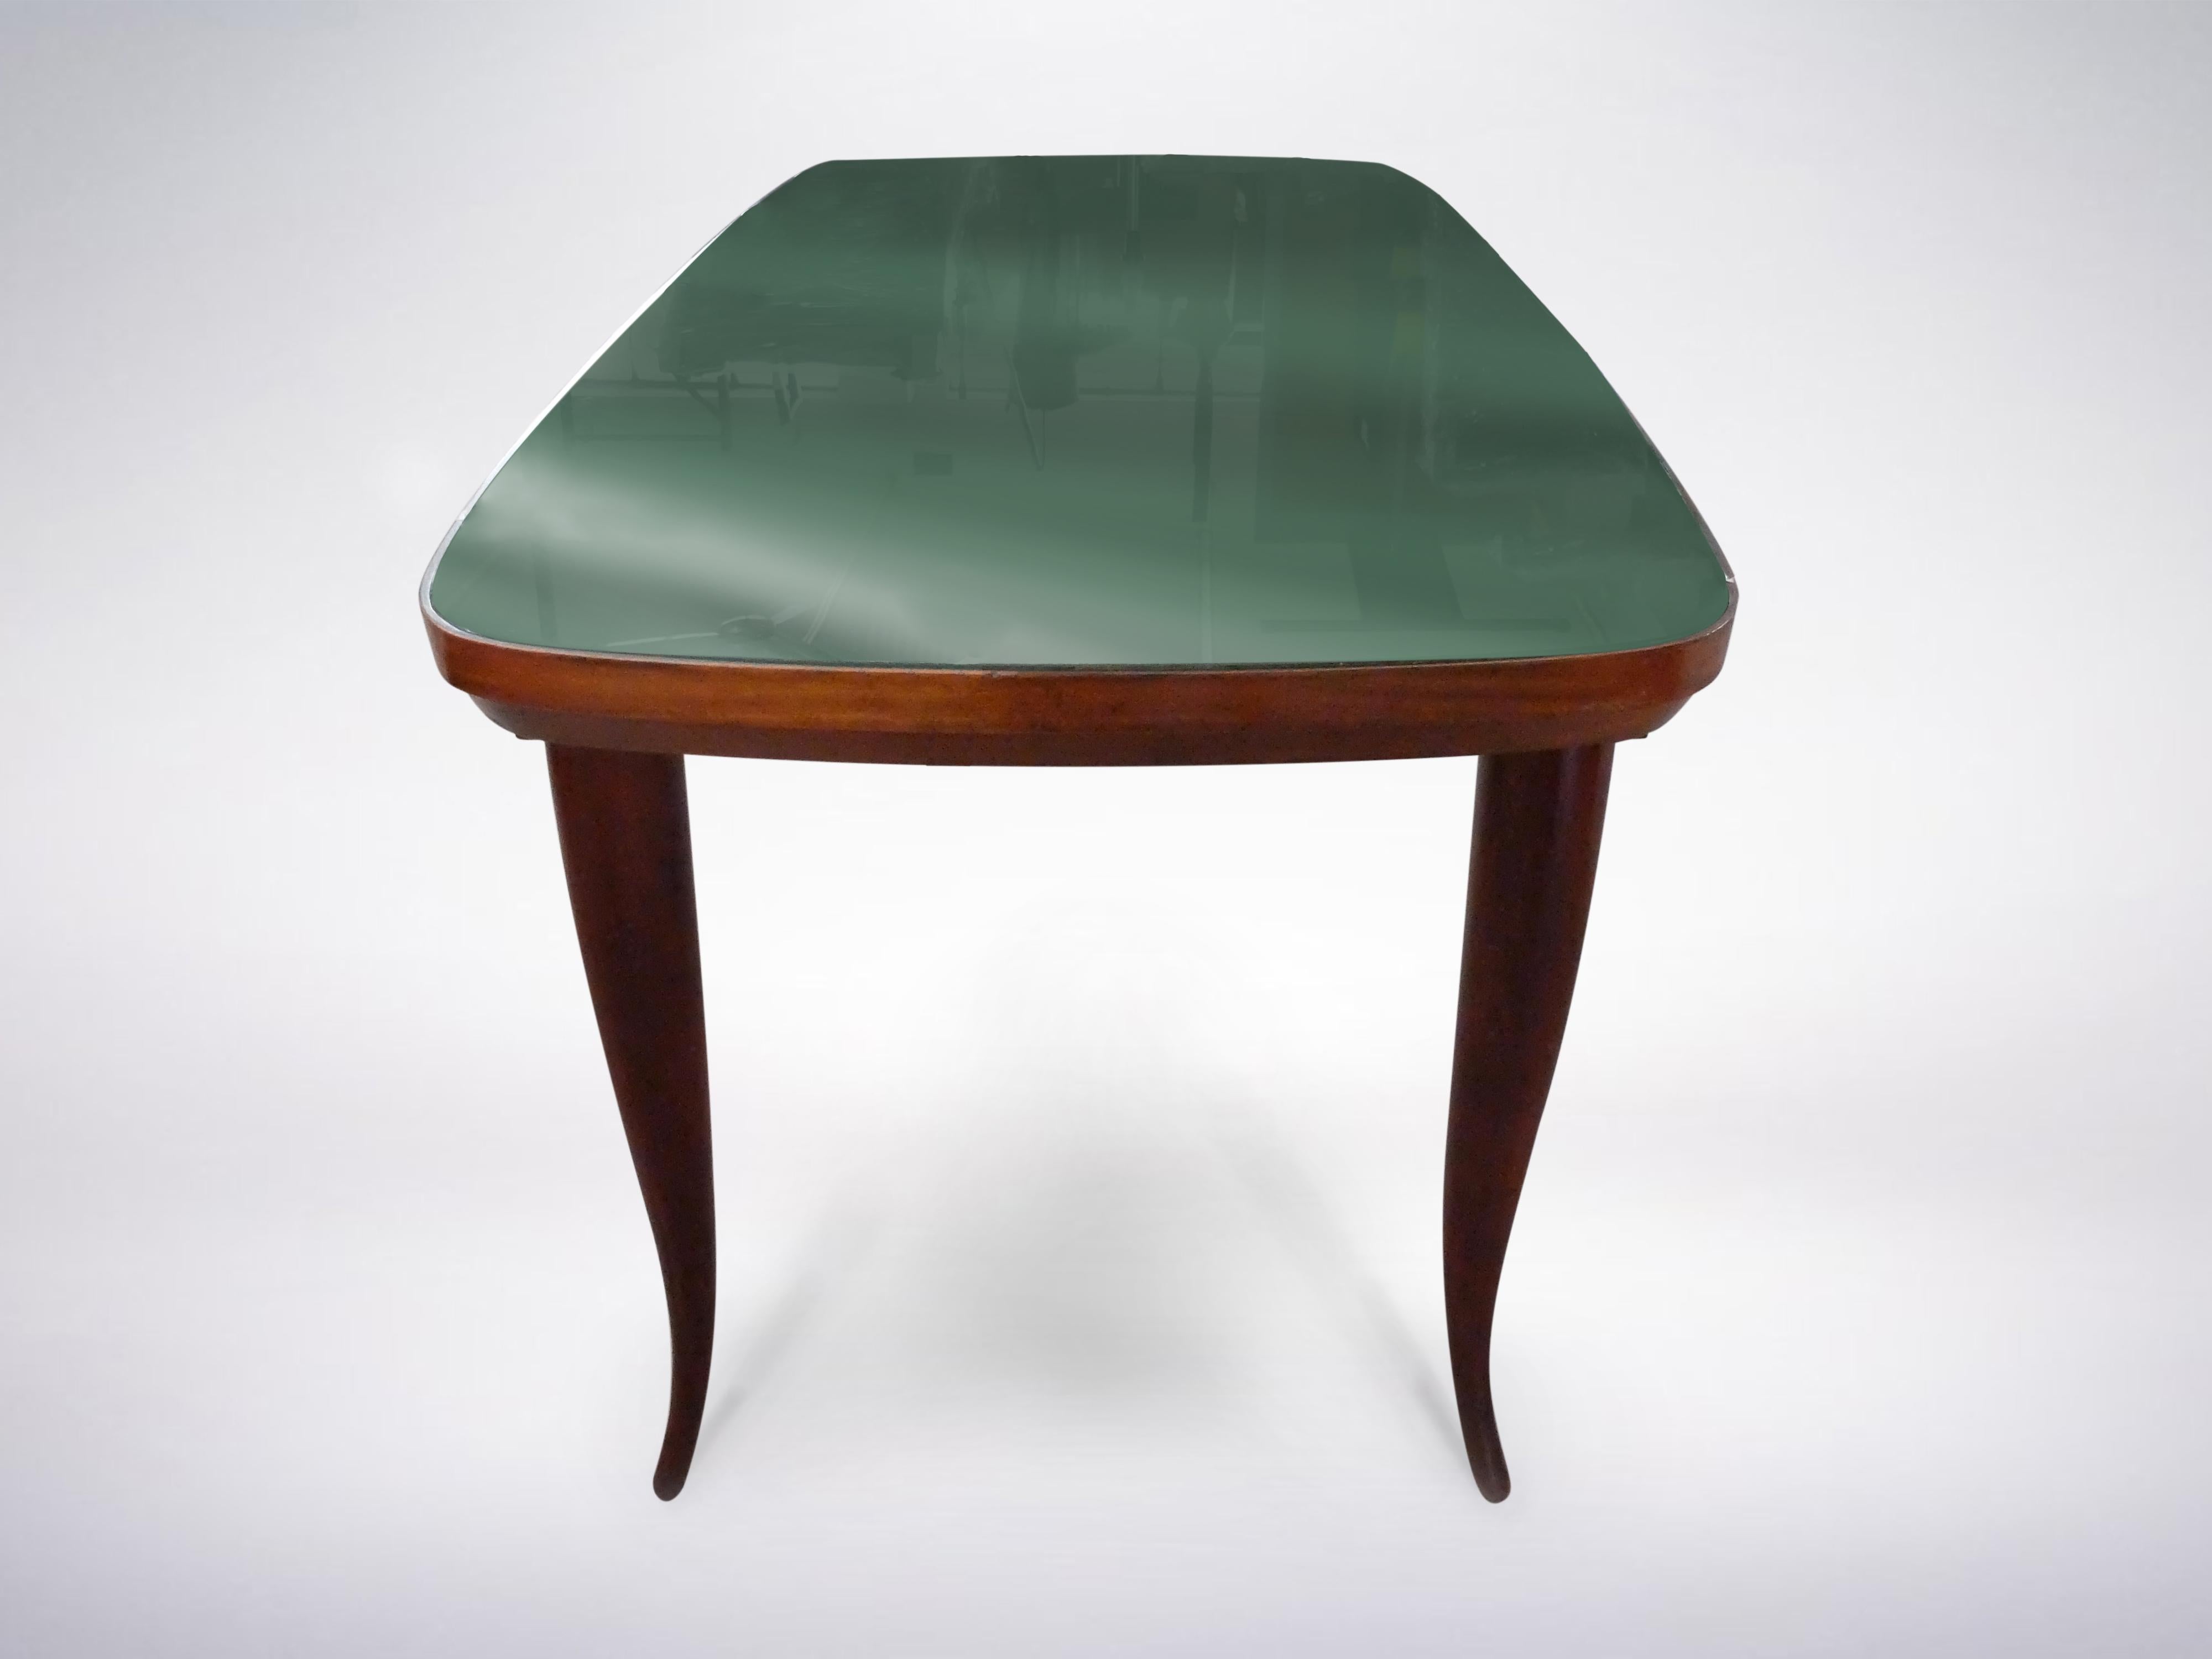 Italian Mid-Century Modern wooden dining table with green glass top, circa 1950



Please note : the 